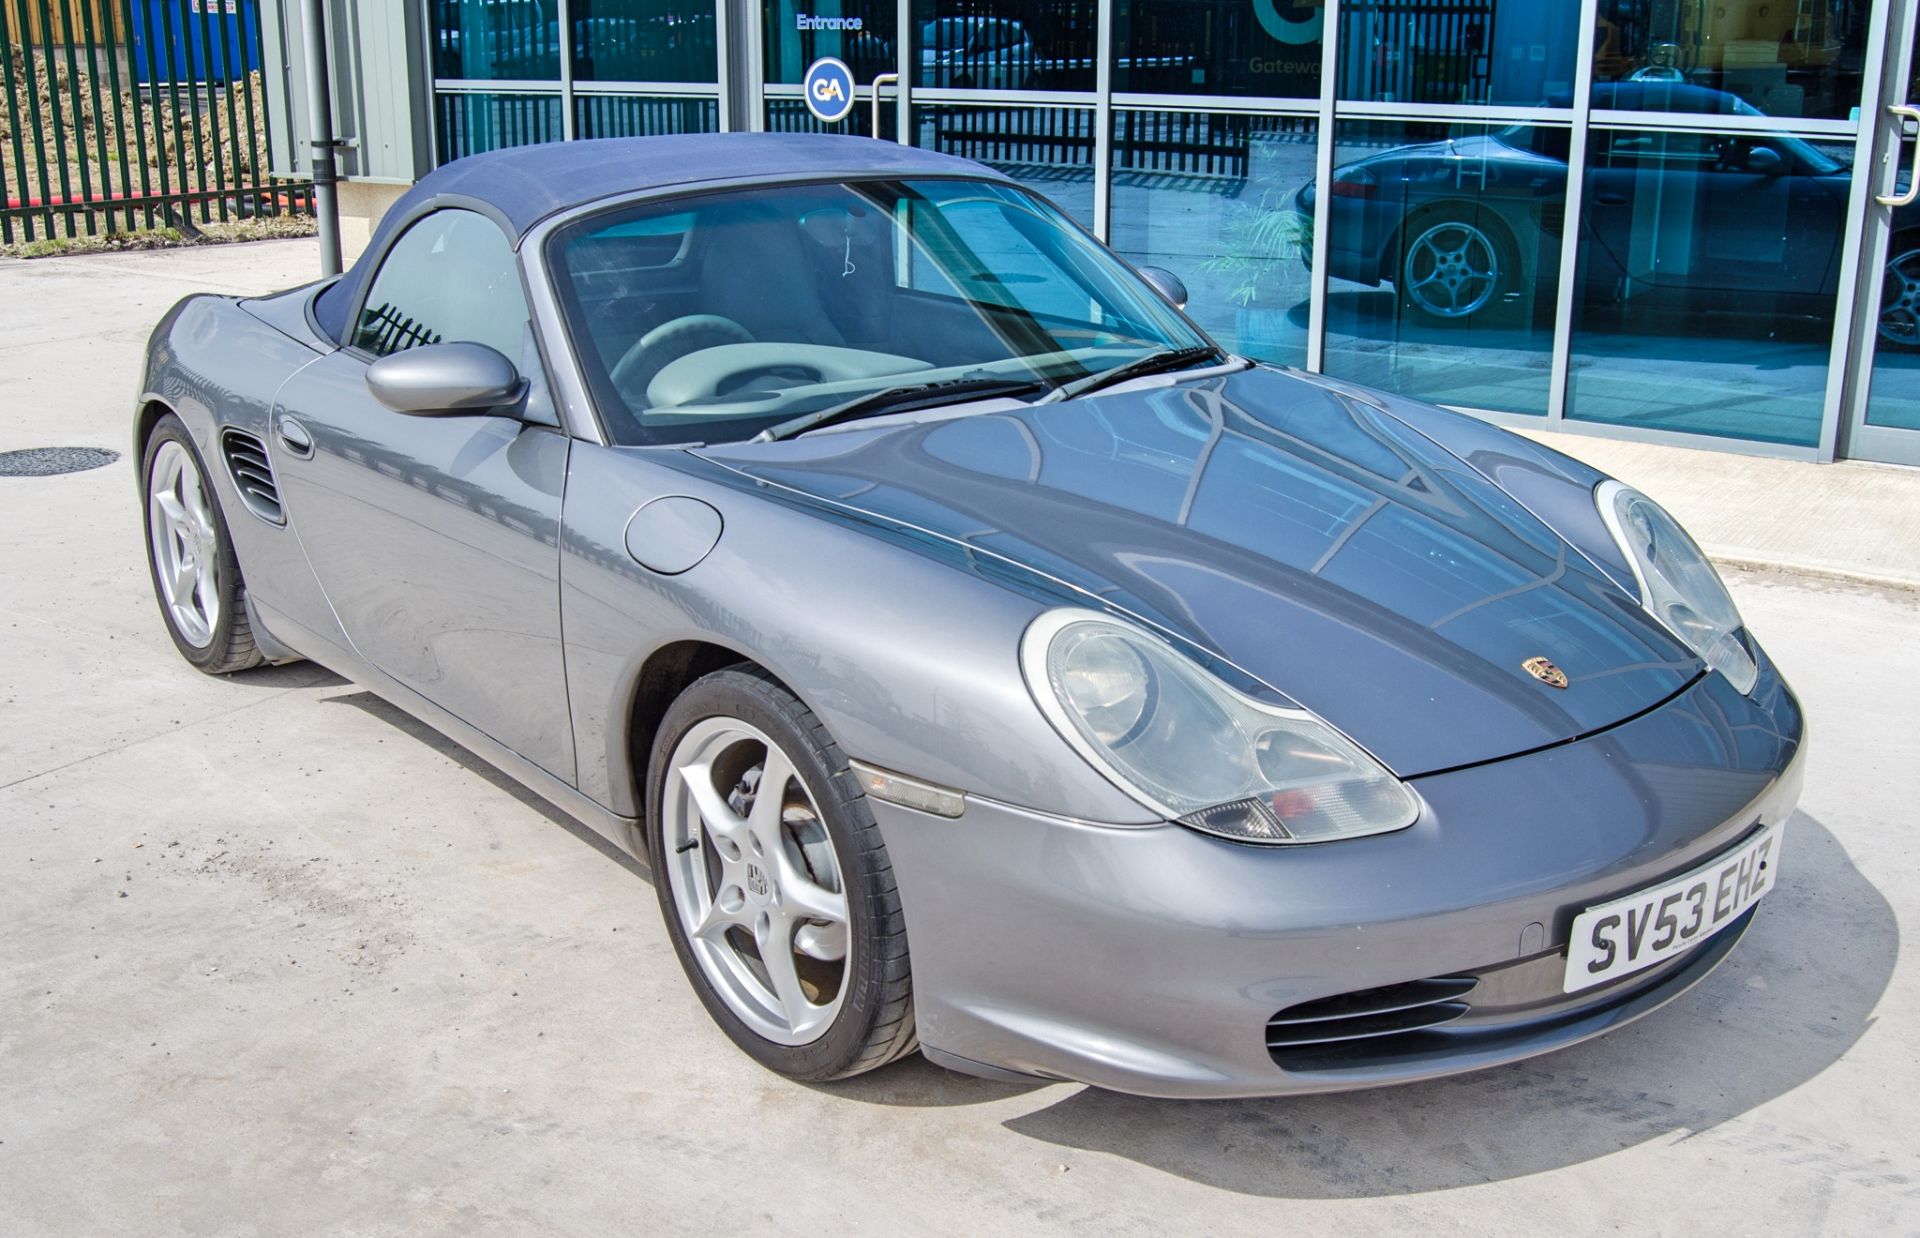 2003 Porsche Boxster 2.7 5 speed manual convertible roadster - Image 29 of 50